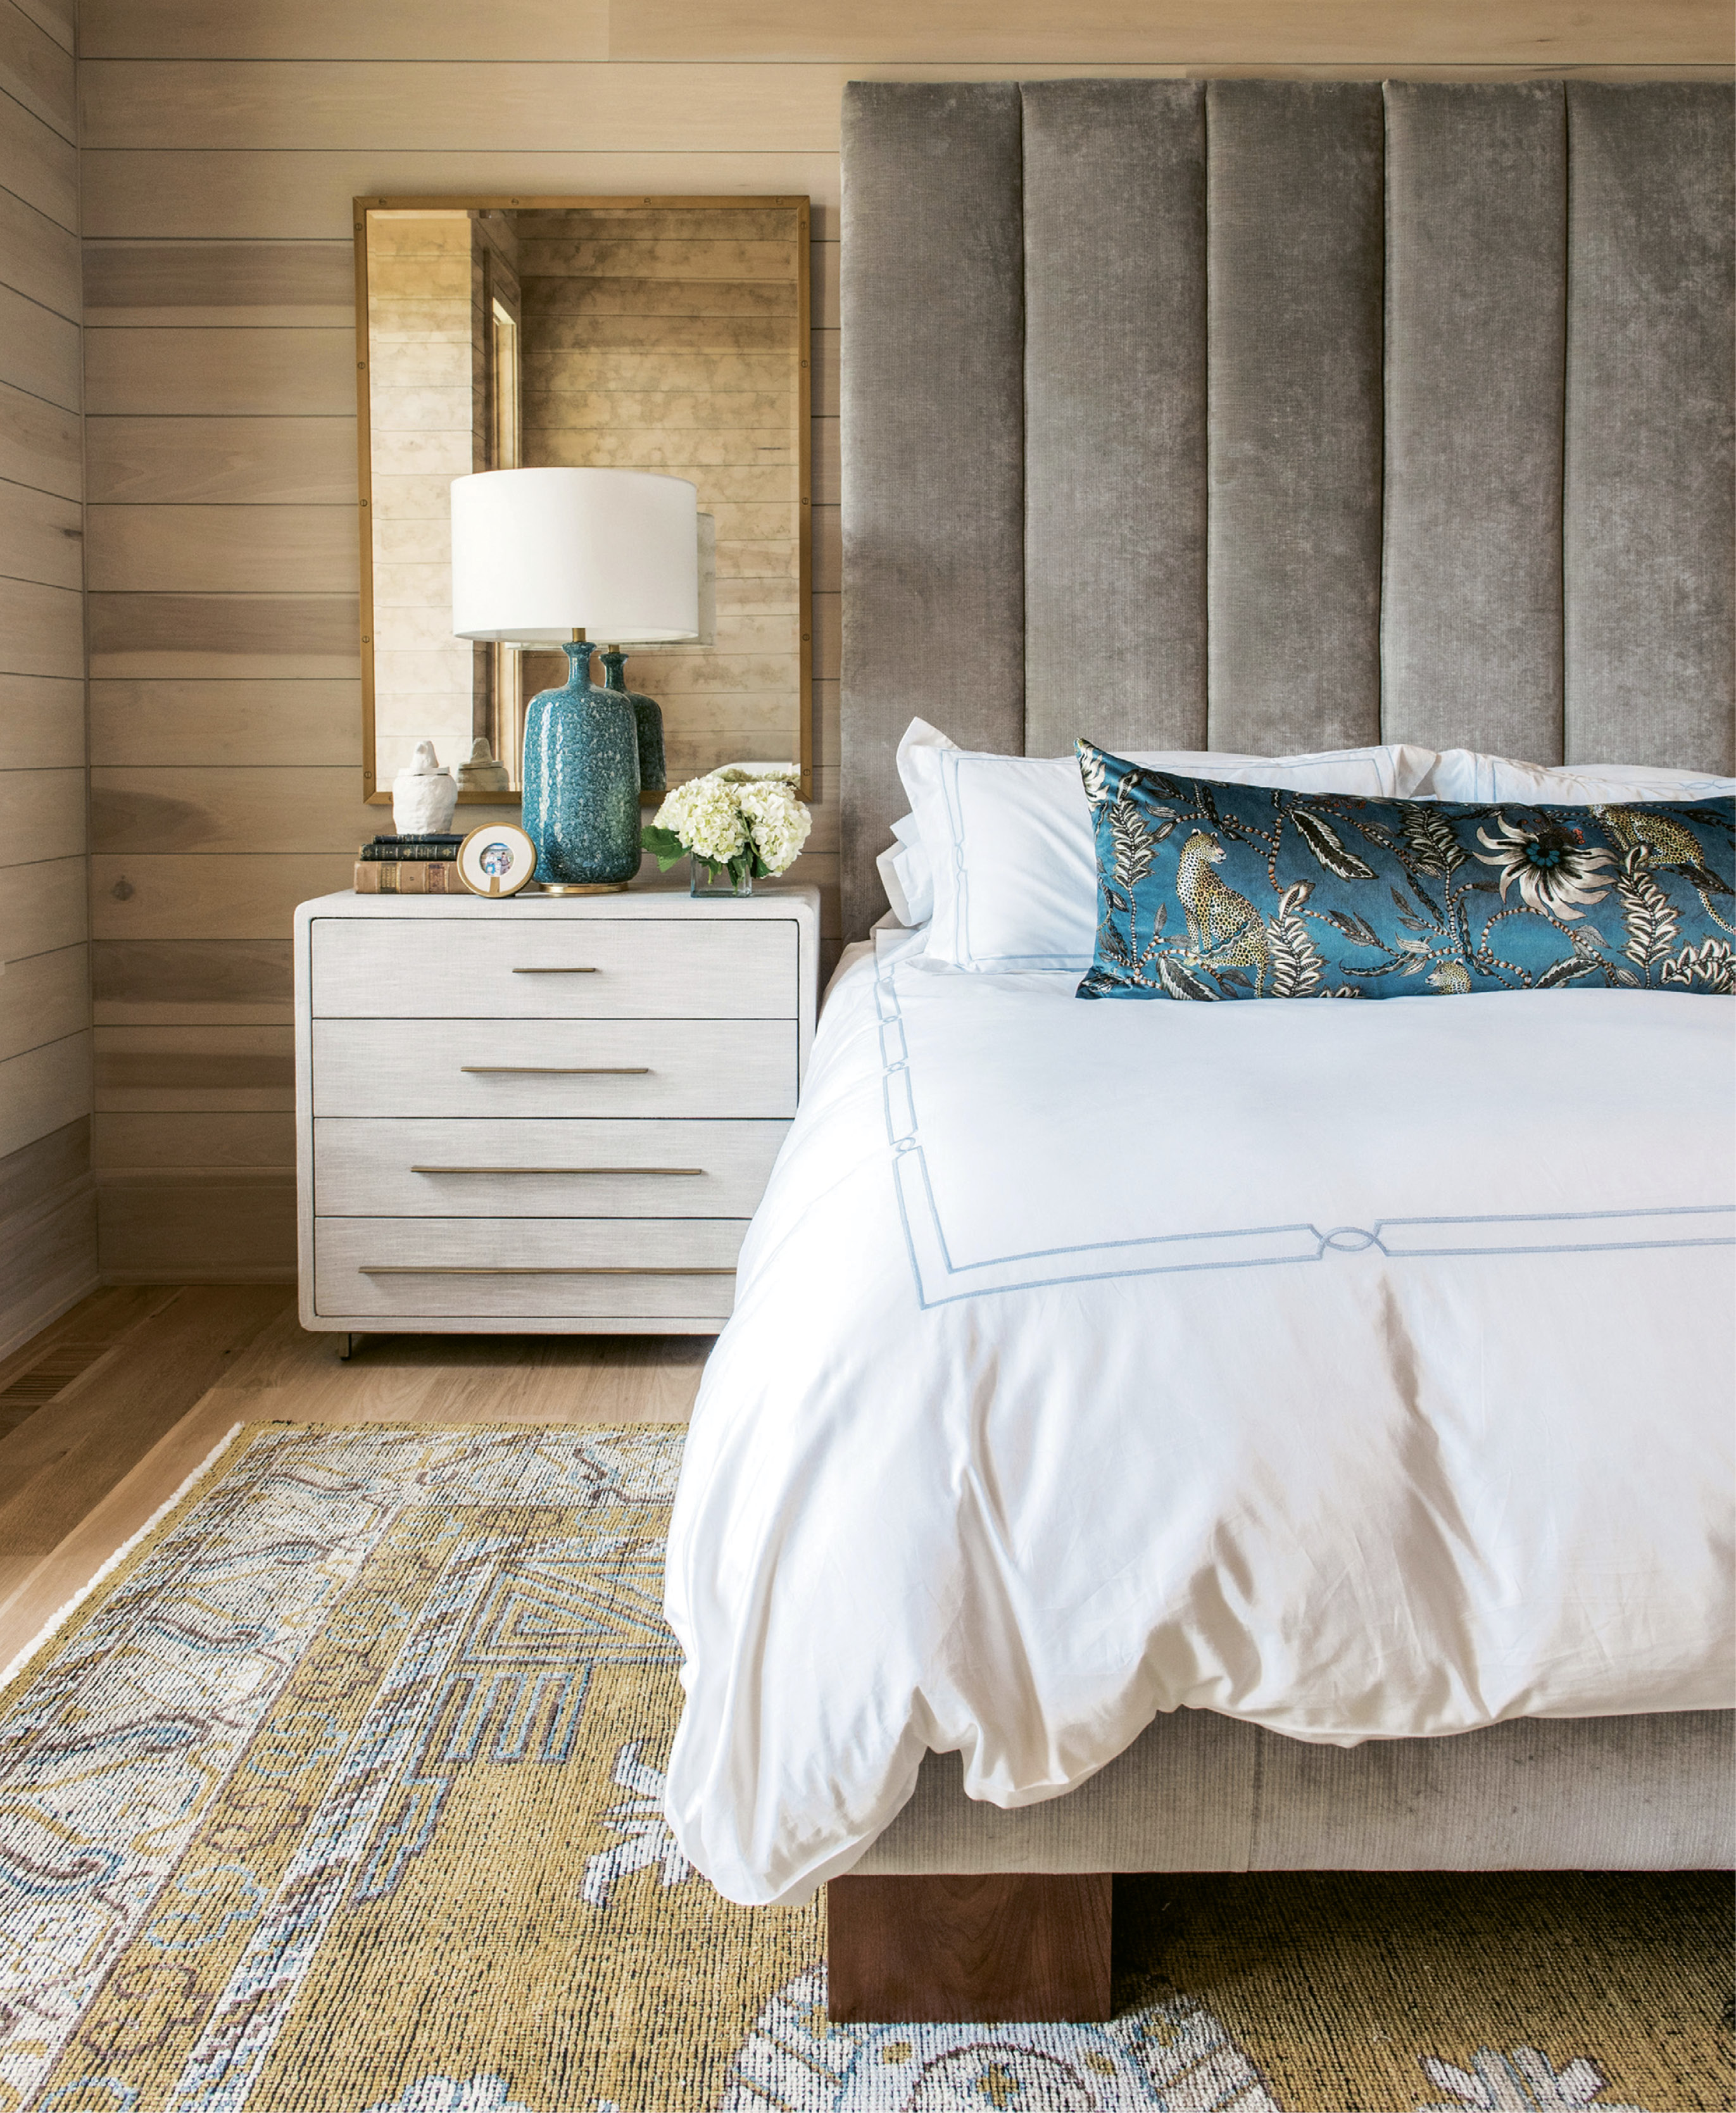 In the couple’s bedroom, poplar-clad walls, velvet lumbar pillow (fabric from Ardmore Design), velvet headboard (custom designed by Erickson and upholstered by Powell’s Upholstery), and antiqued glass mirrors layer on the luxe.